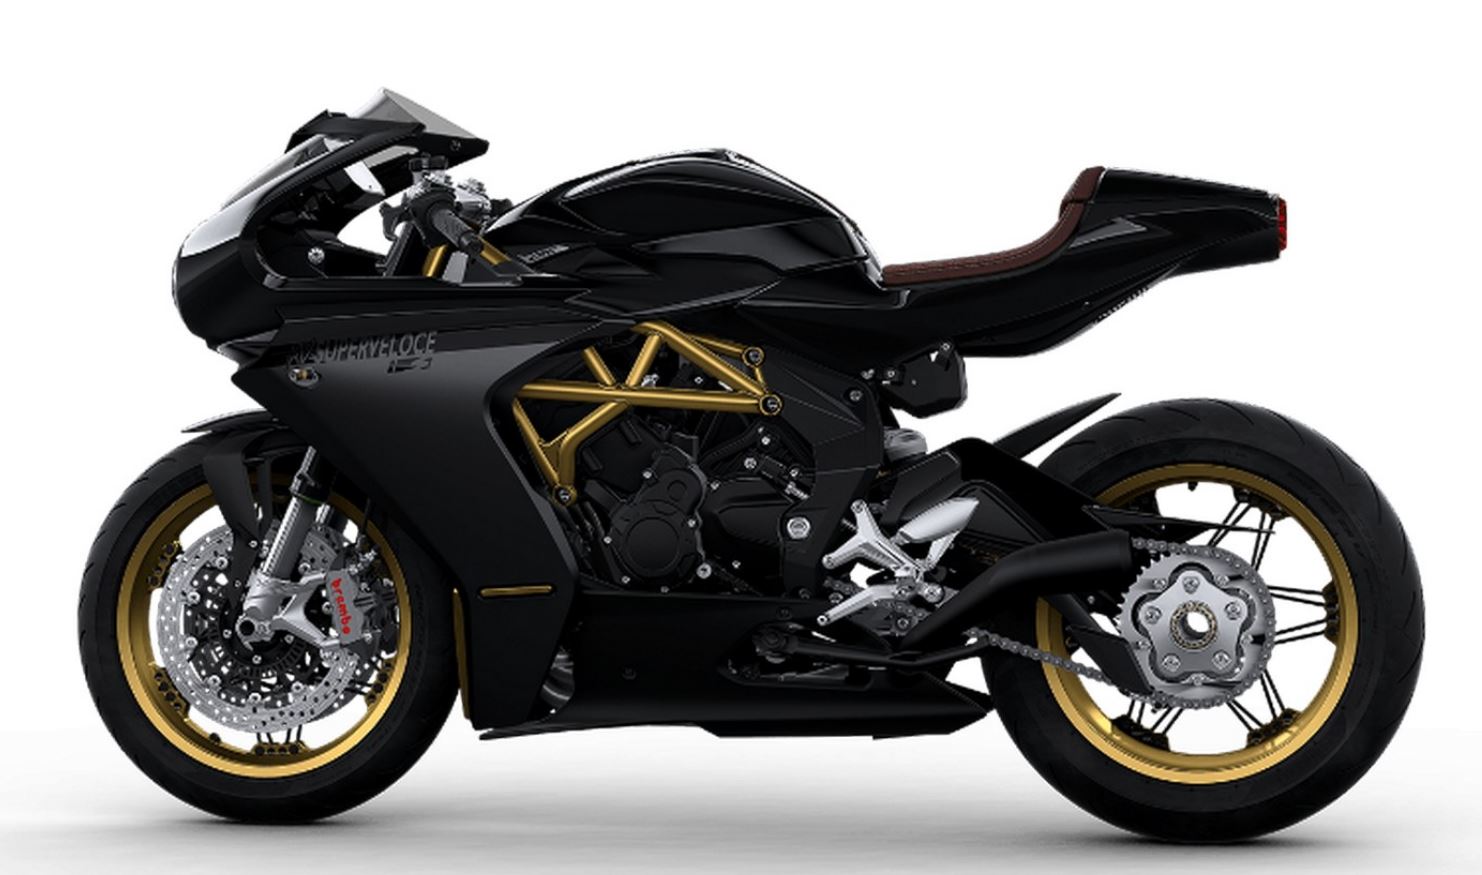 2023-MV-Agusta-Super-Veloce-S-Specs-Price-Features-Mileage-Review-Product